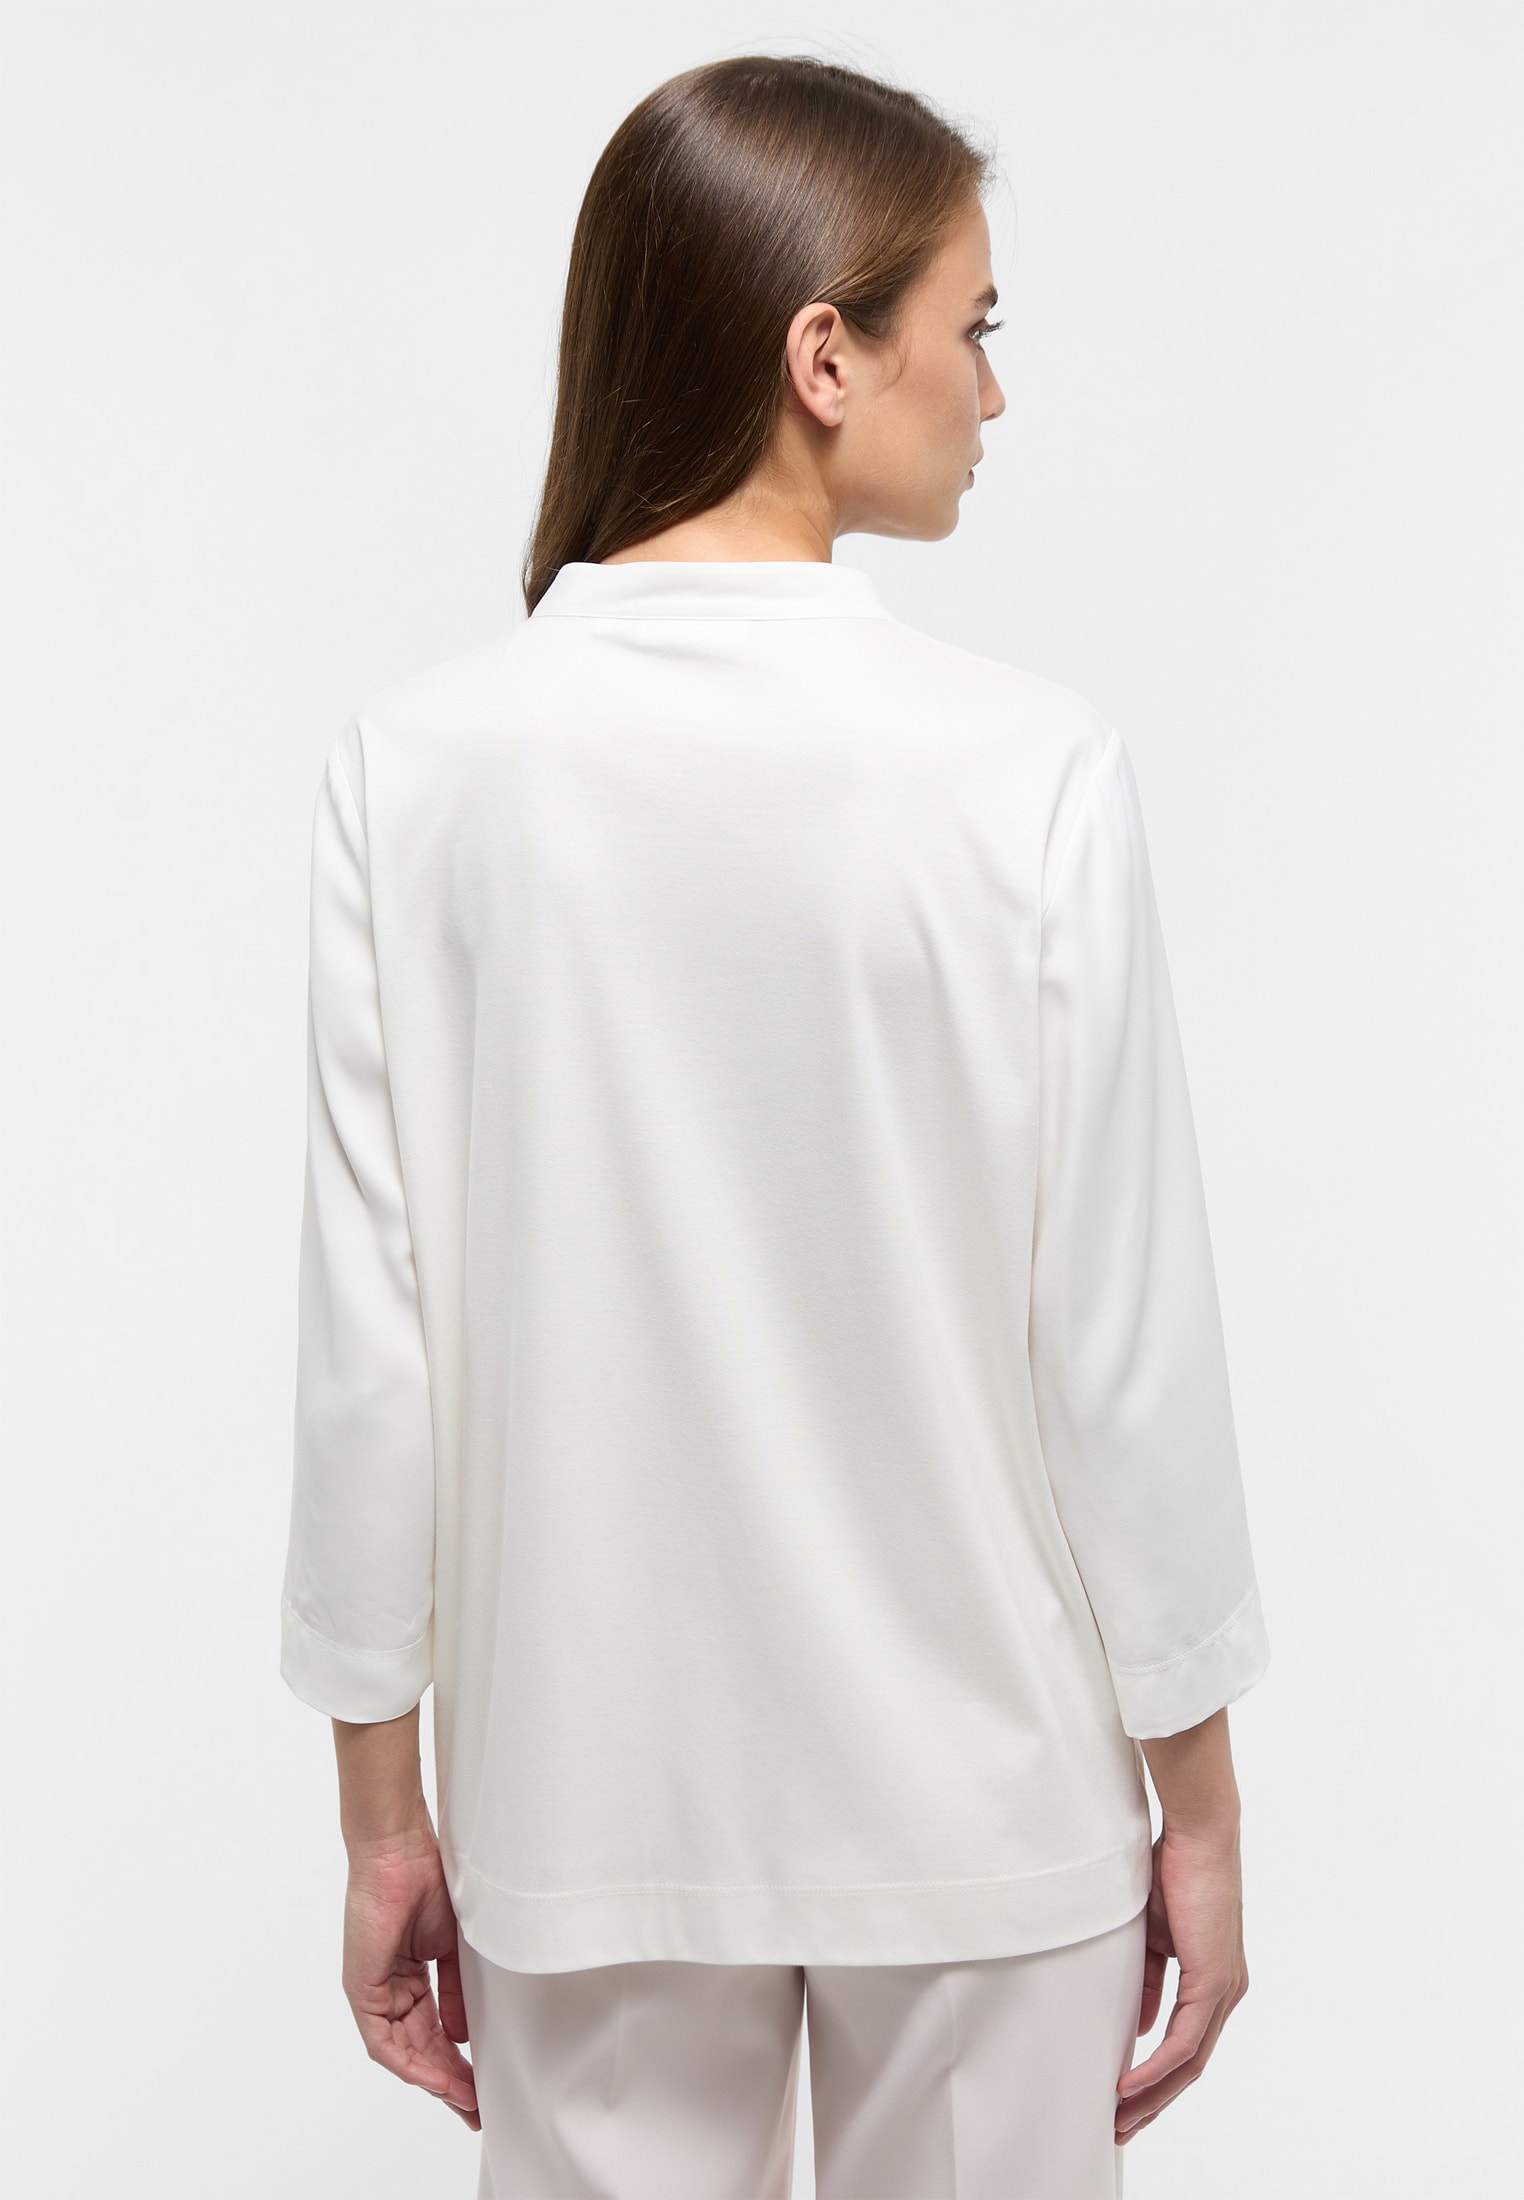 | | | off-white 46 2BL04358-00-02-46-3/4 off-white unifarben | Bluse in Shirt 3/4-Arm Viscose